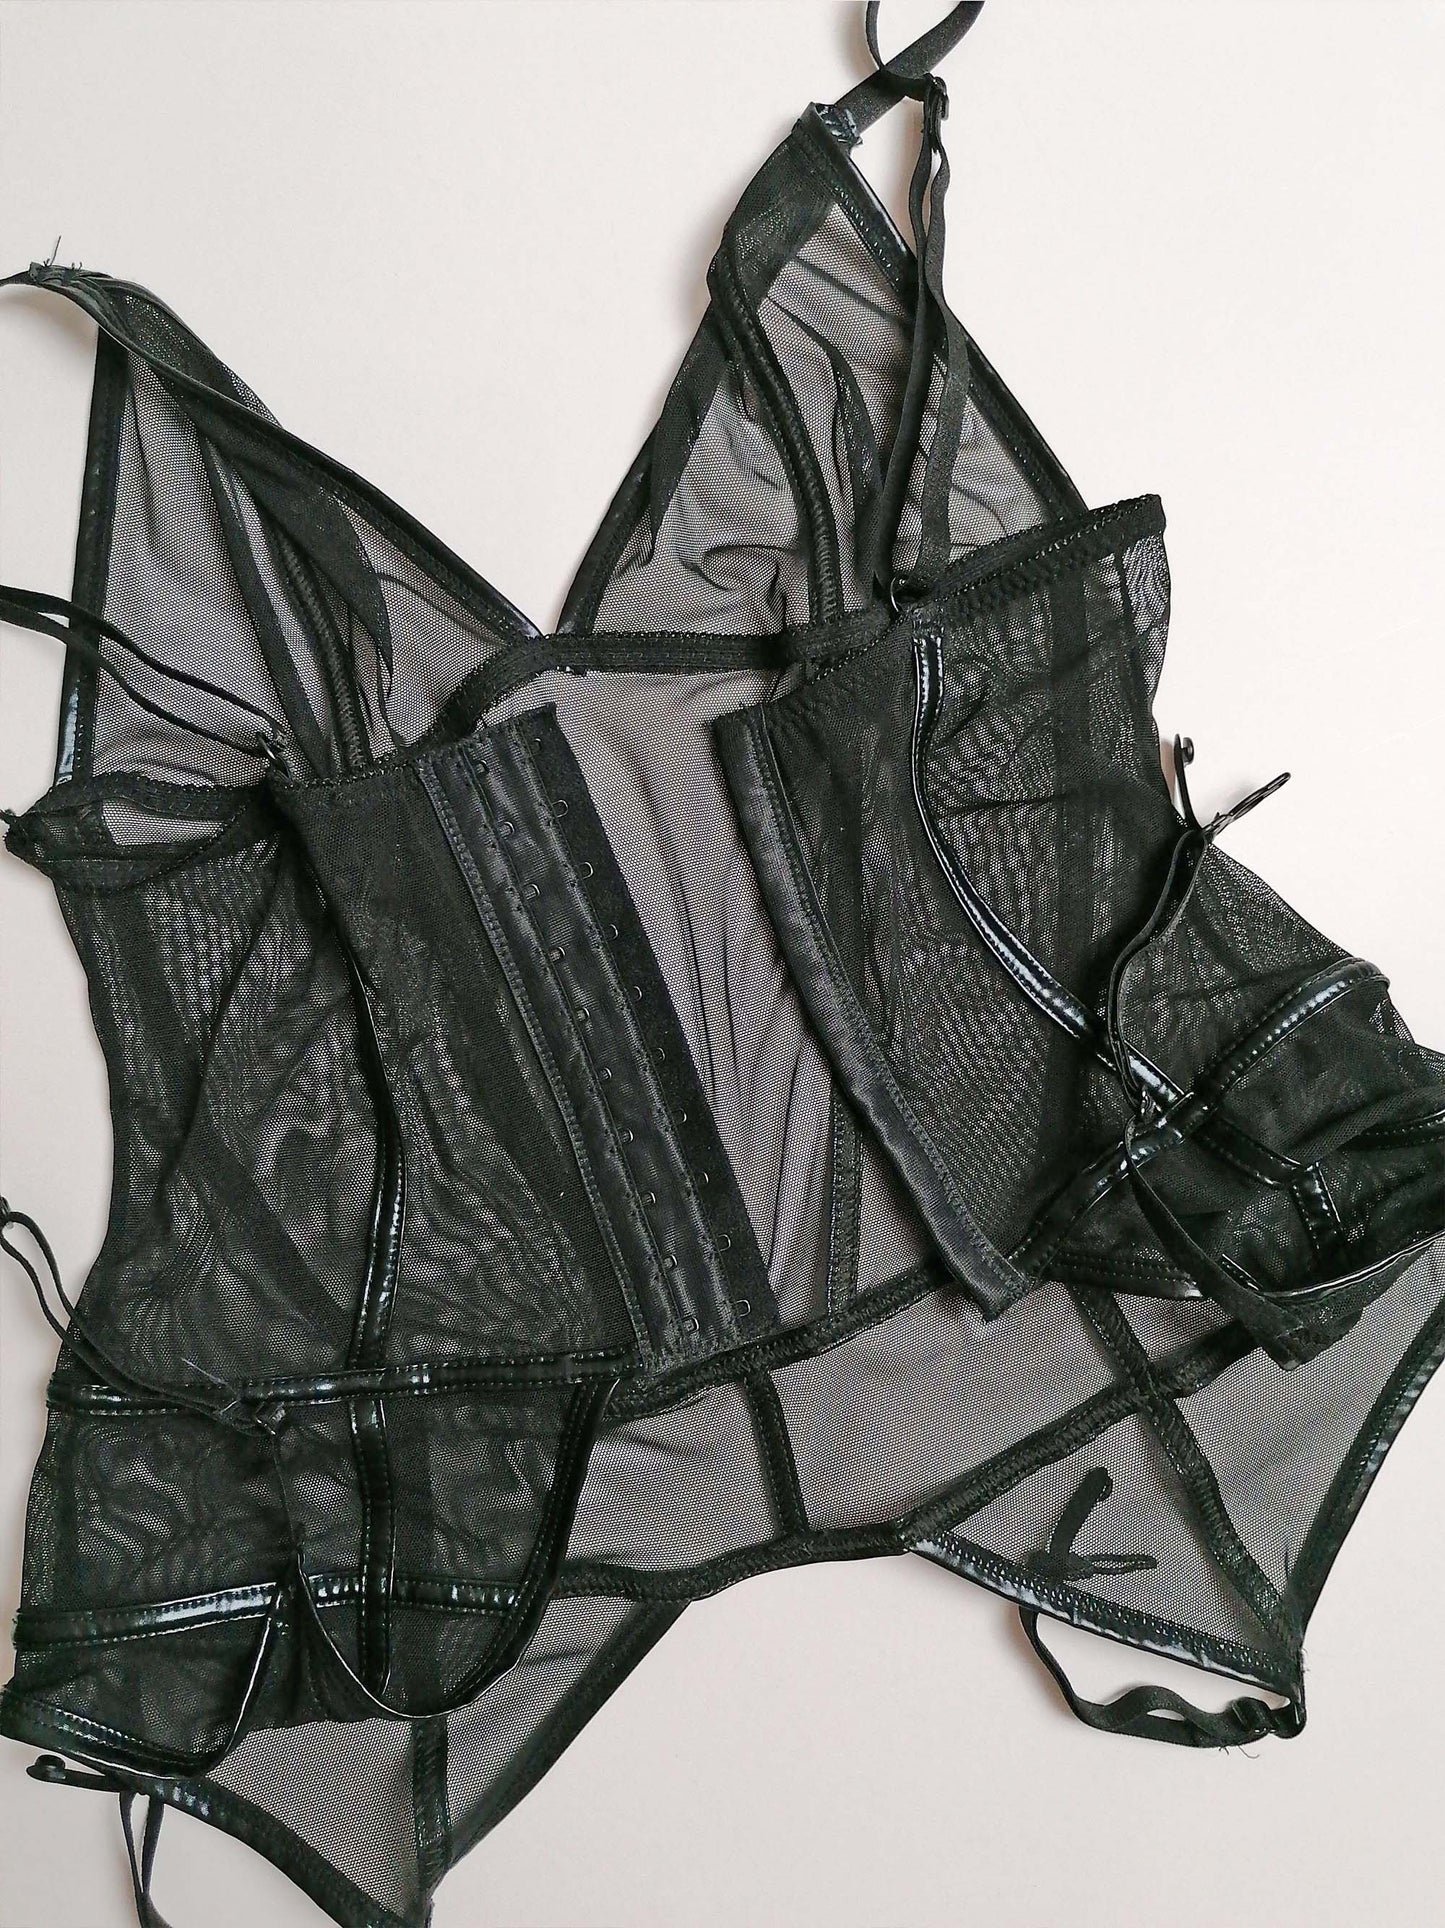 Mesh Corset Top and Thong Black Lingerie Set - size S-M